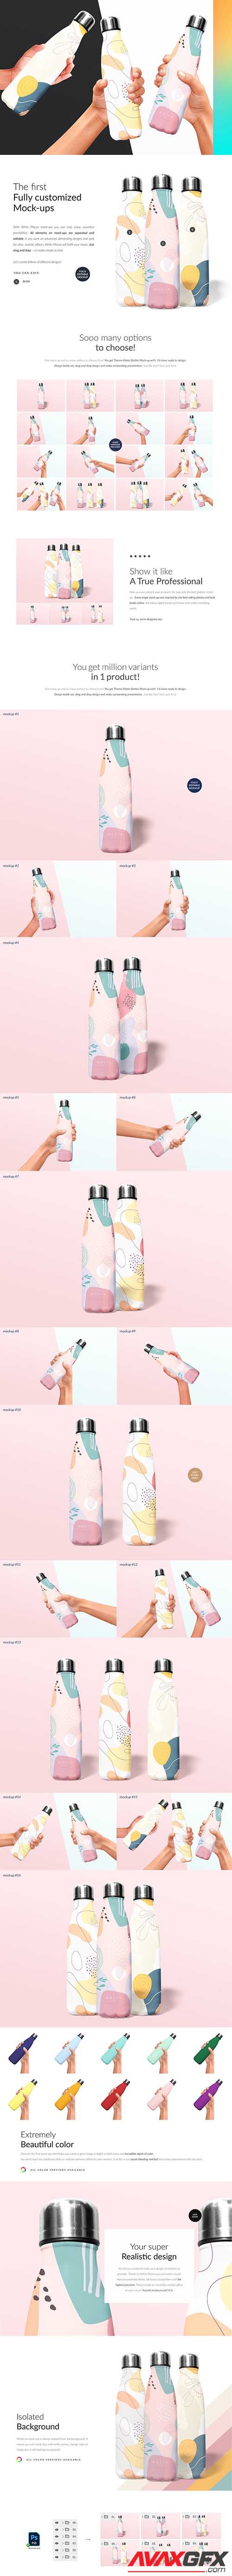 CreativeMarket - Thermo Water Bottle 16xMock-ups 6526616